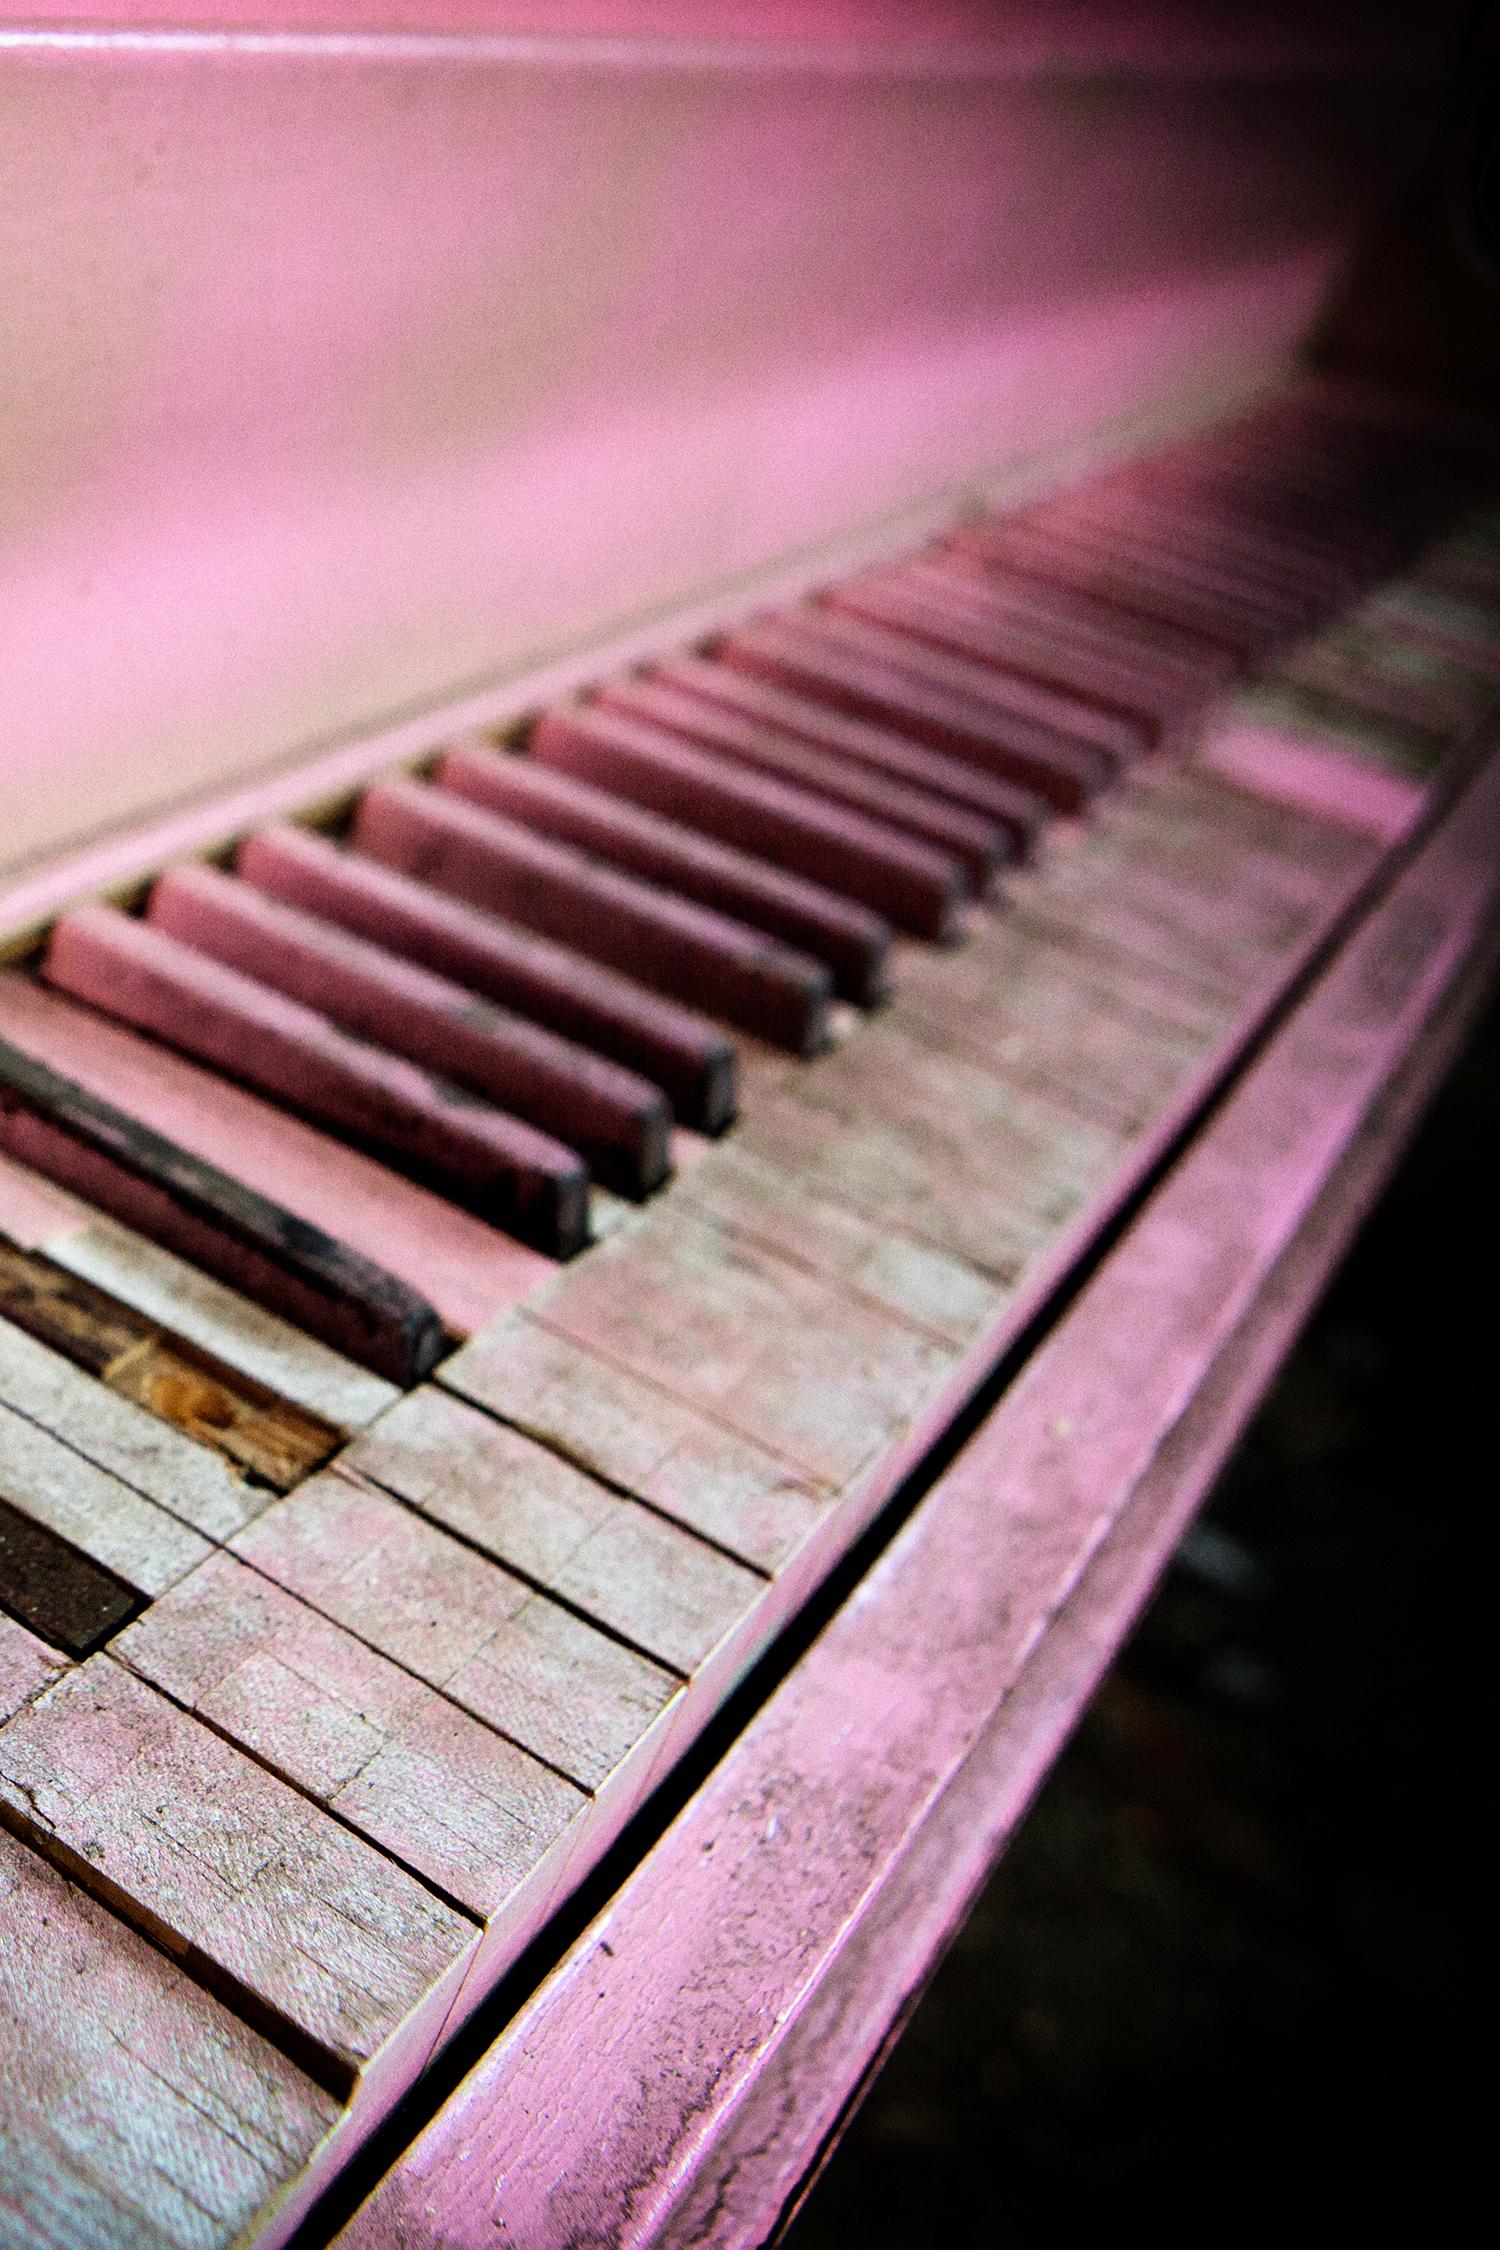 Rebecca Skinner’s “Pink Piano II” is a 16 x 24 inch contemporary metal print of the keys on an abandoned pink piano located in the remnants of an auditorium in Indiana. The focus softens at the edges adding a grittiness to the image giving it the